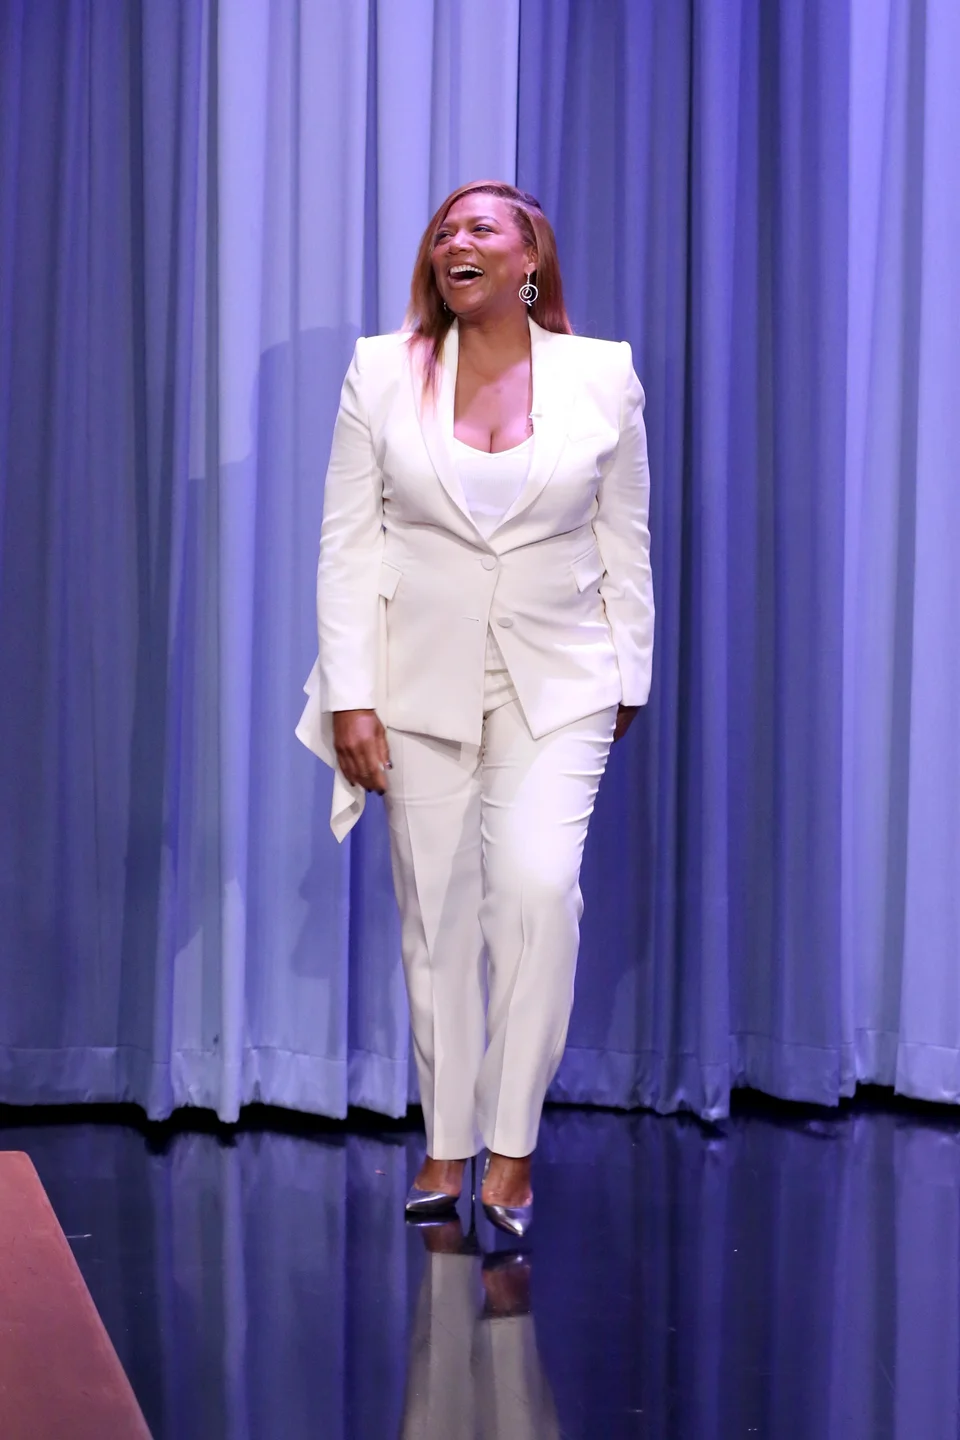 20 Best Plus-Size Celebrity Outfits Ideas from This Year